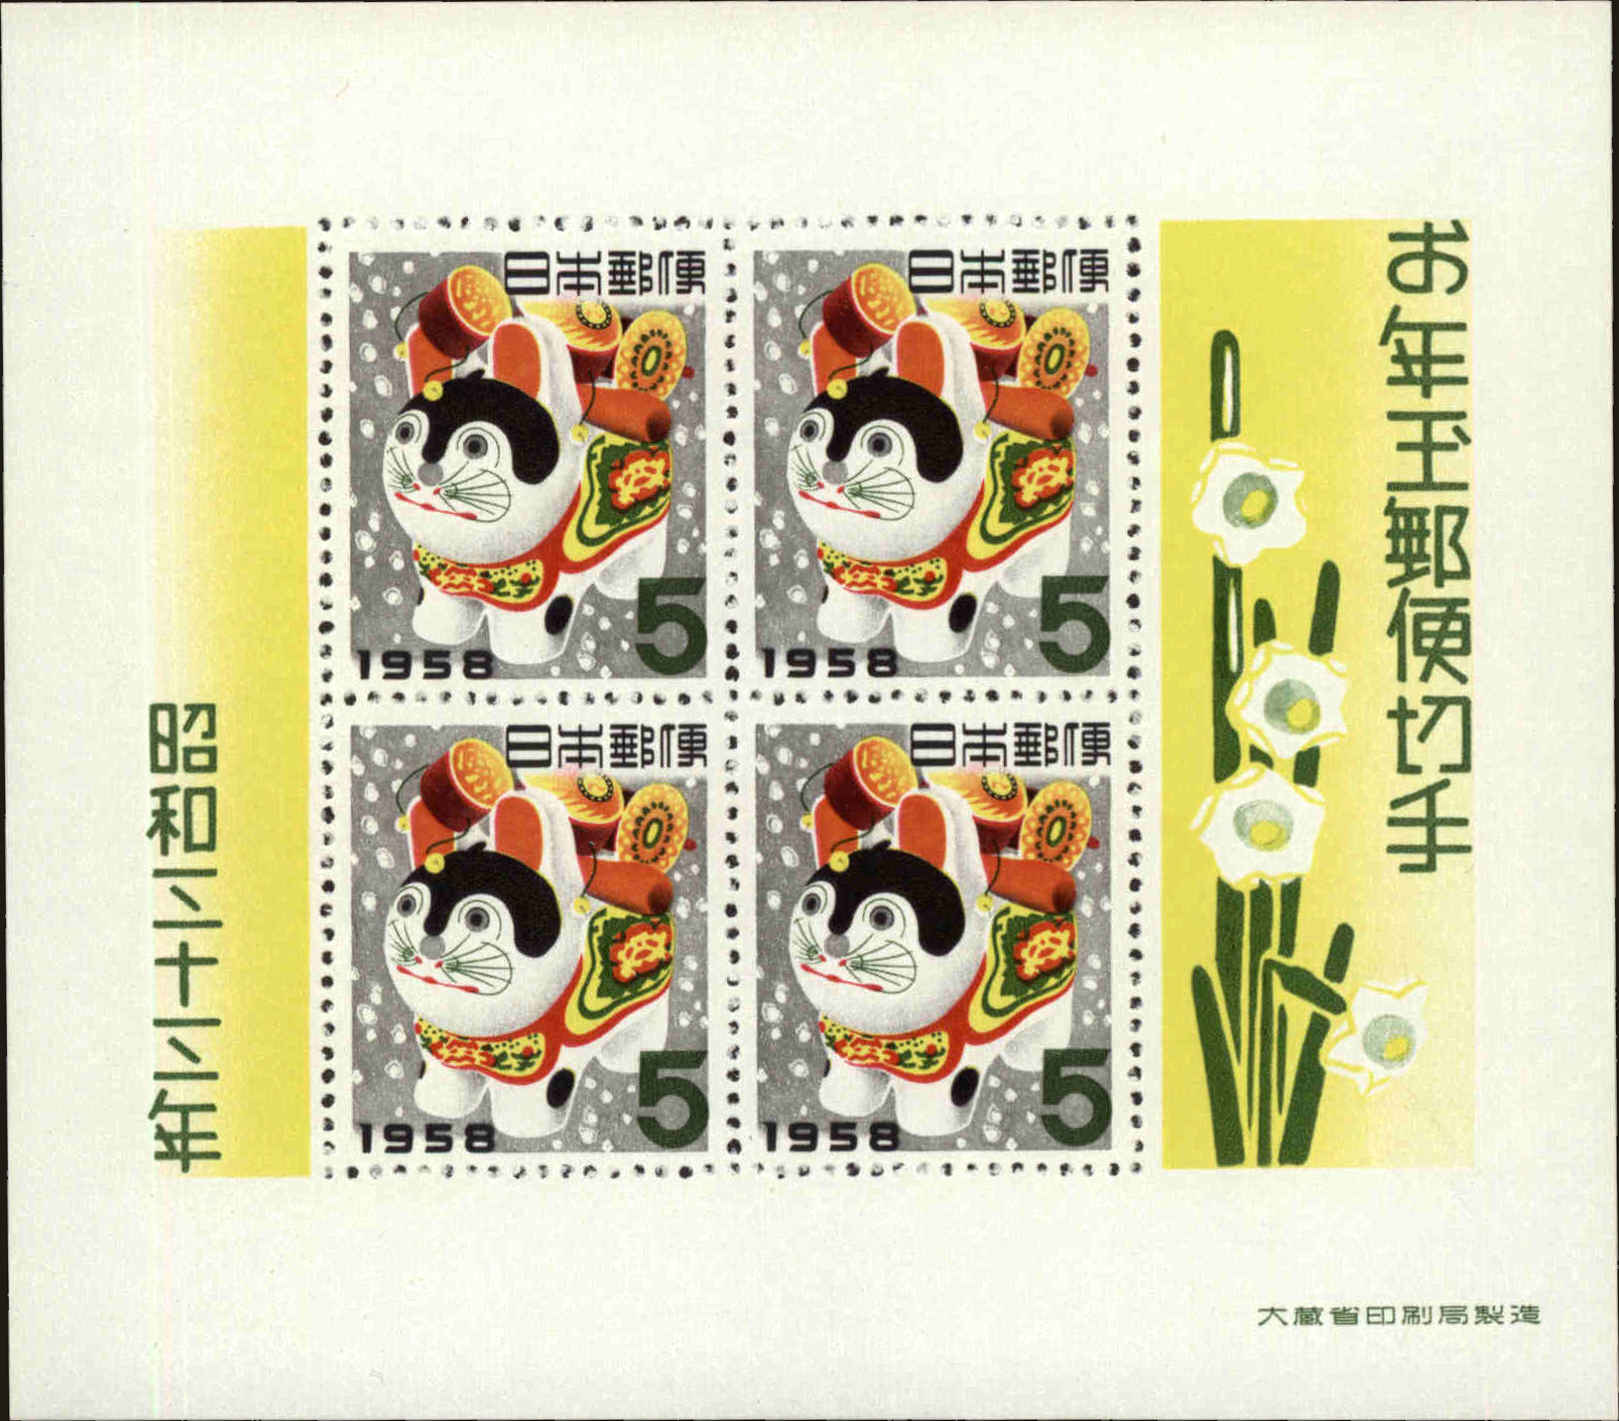 Front view of Japan 644 collectors stamp